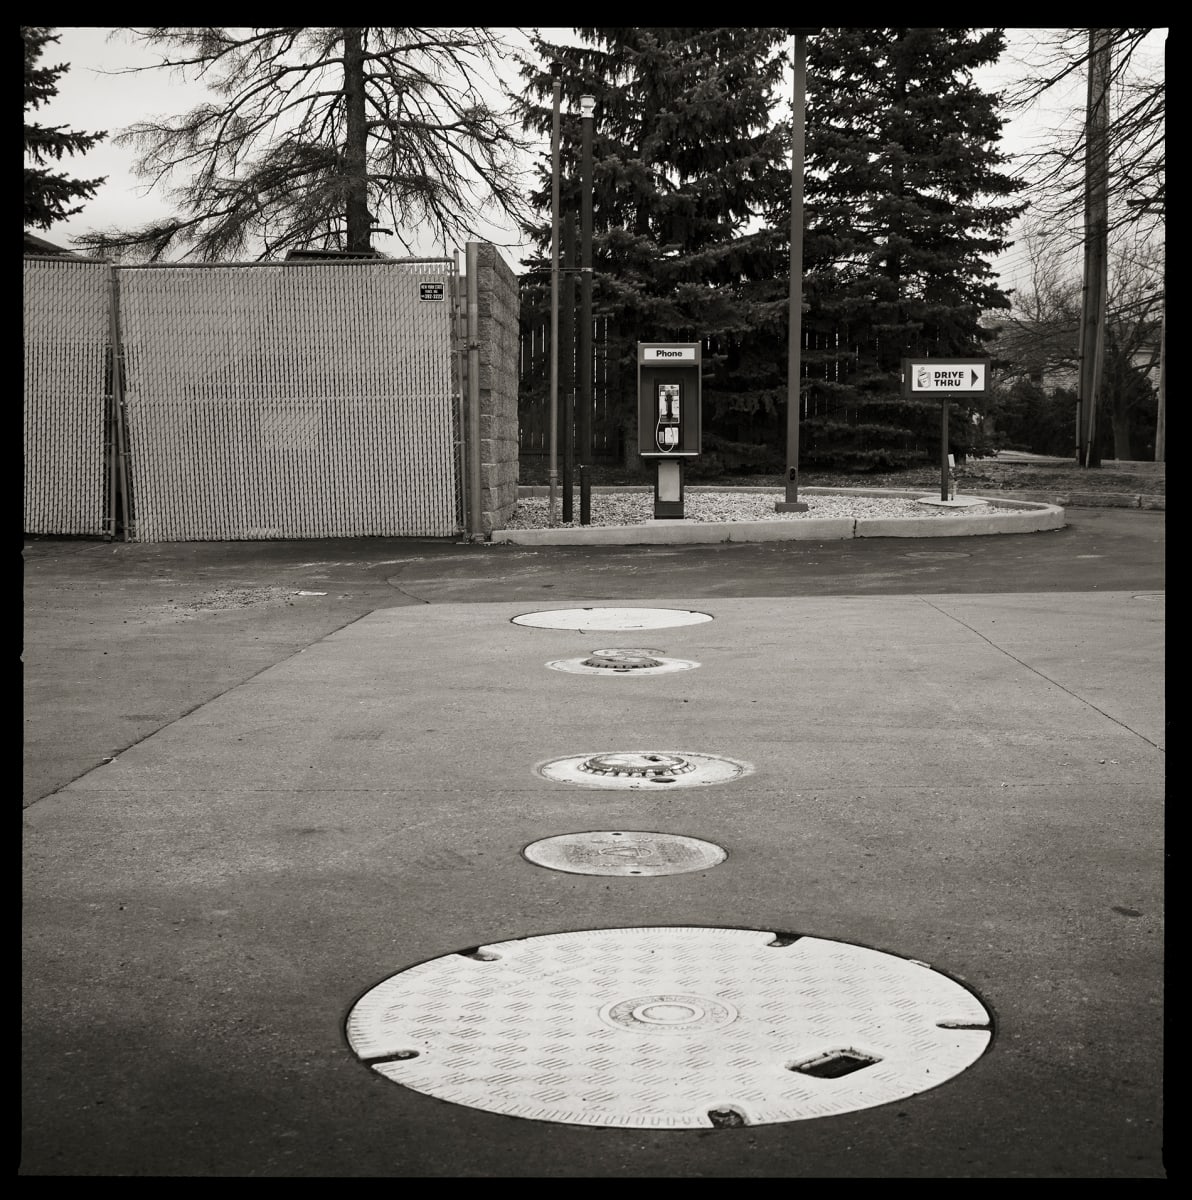 585.334.9884 – 3068 East Henrietta Road, Henrietta, NY 14467 by Eric T. Kunsman  Image: ID: A black and white image shows a payphone across the street.  In the street is a line of circular manhole covers that are white against the dark grey road.  Behind the payphone are trees.